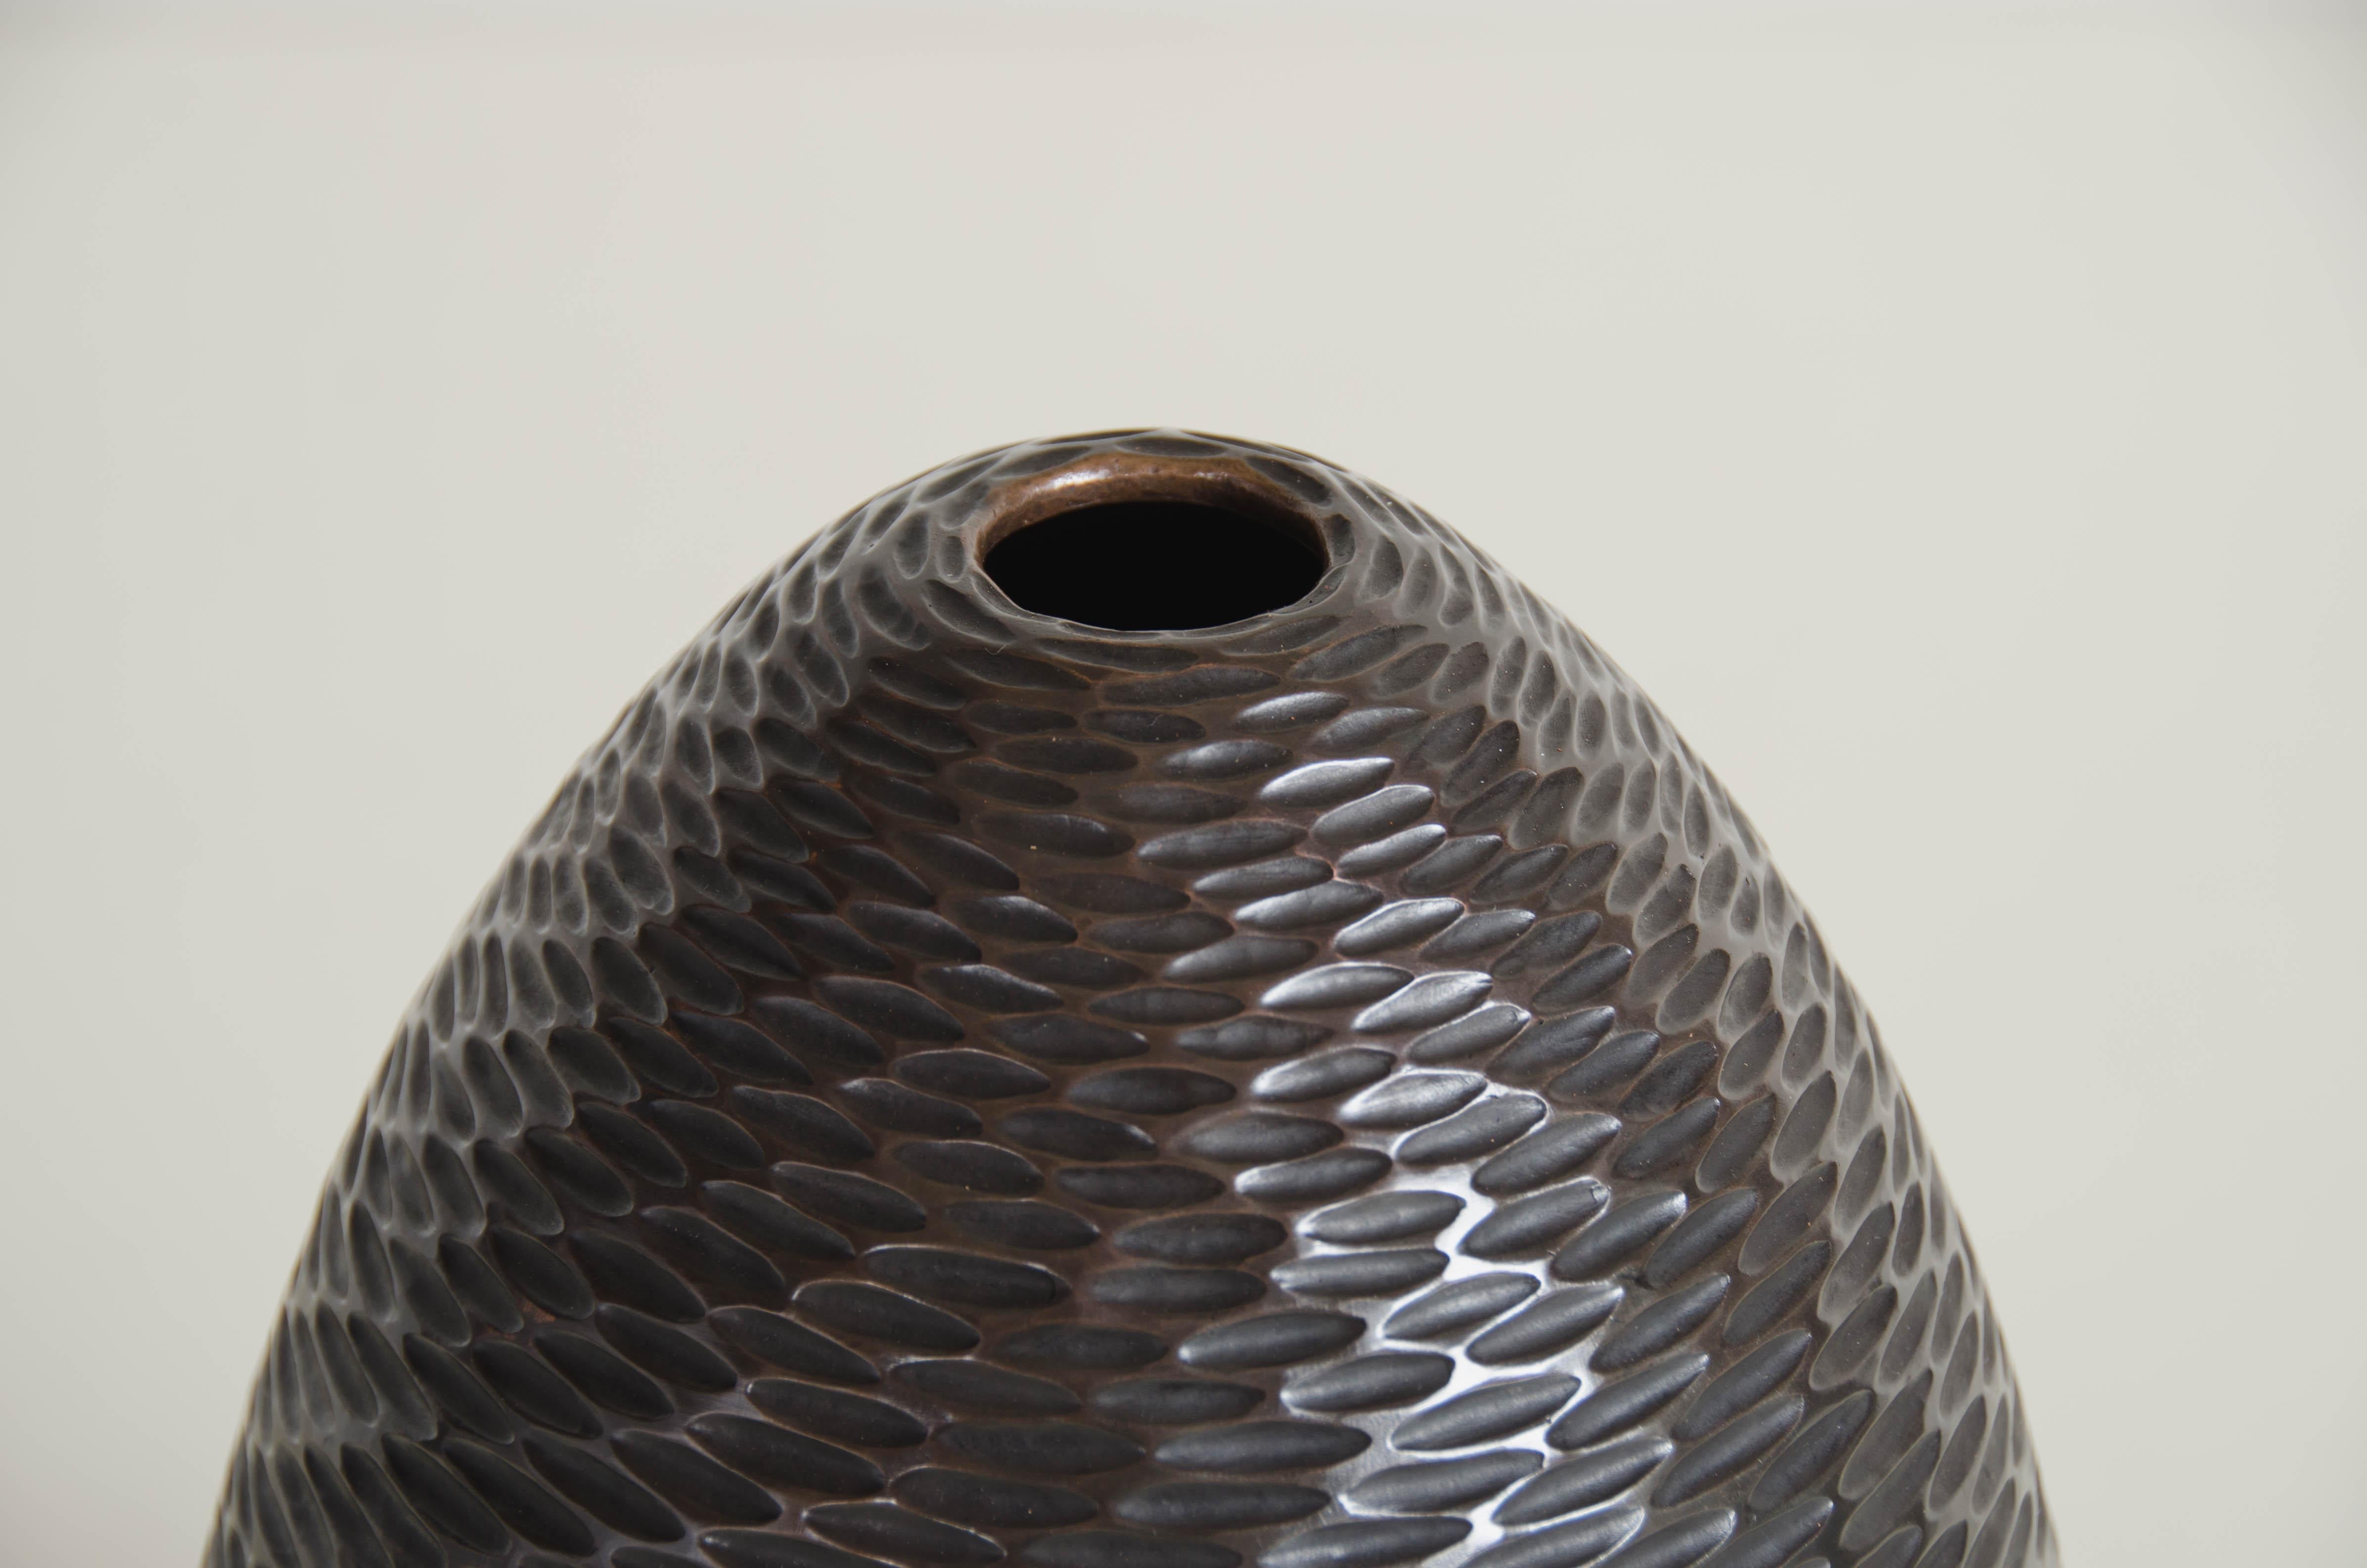 American Pino Vase in Antique Copper by Robert Kuo, Limited Edition For Sale